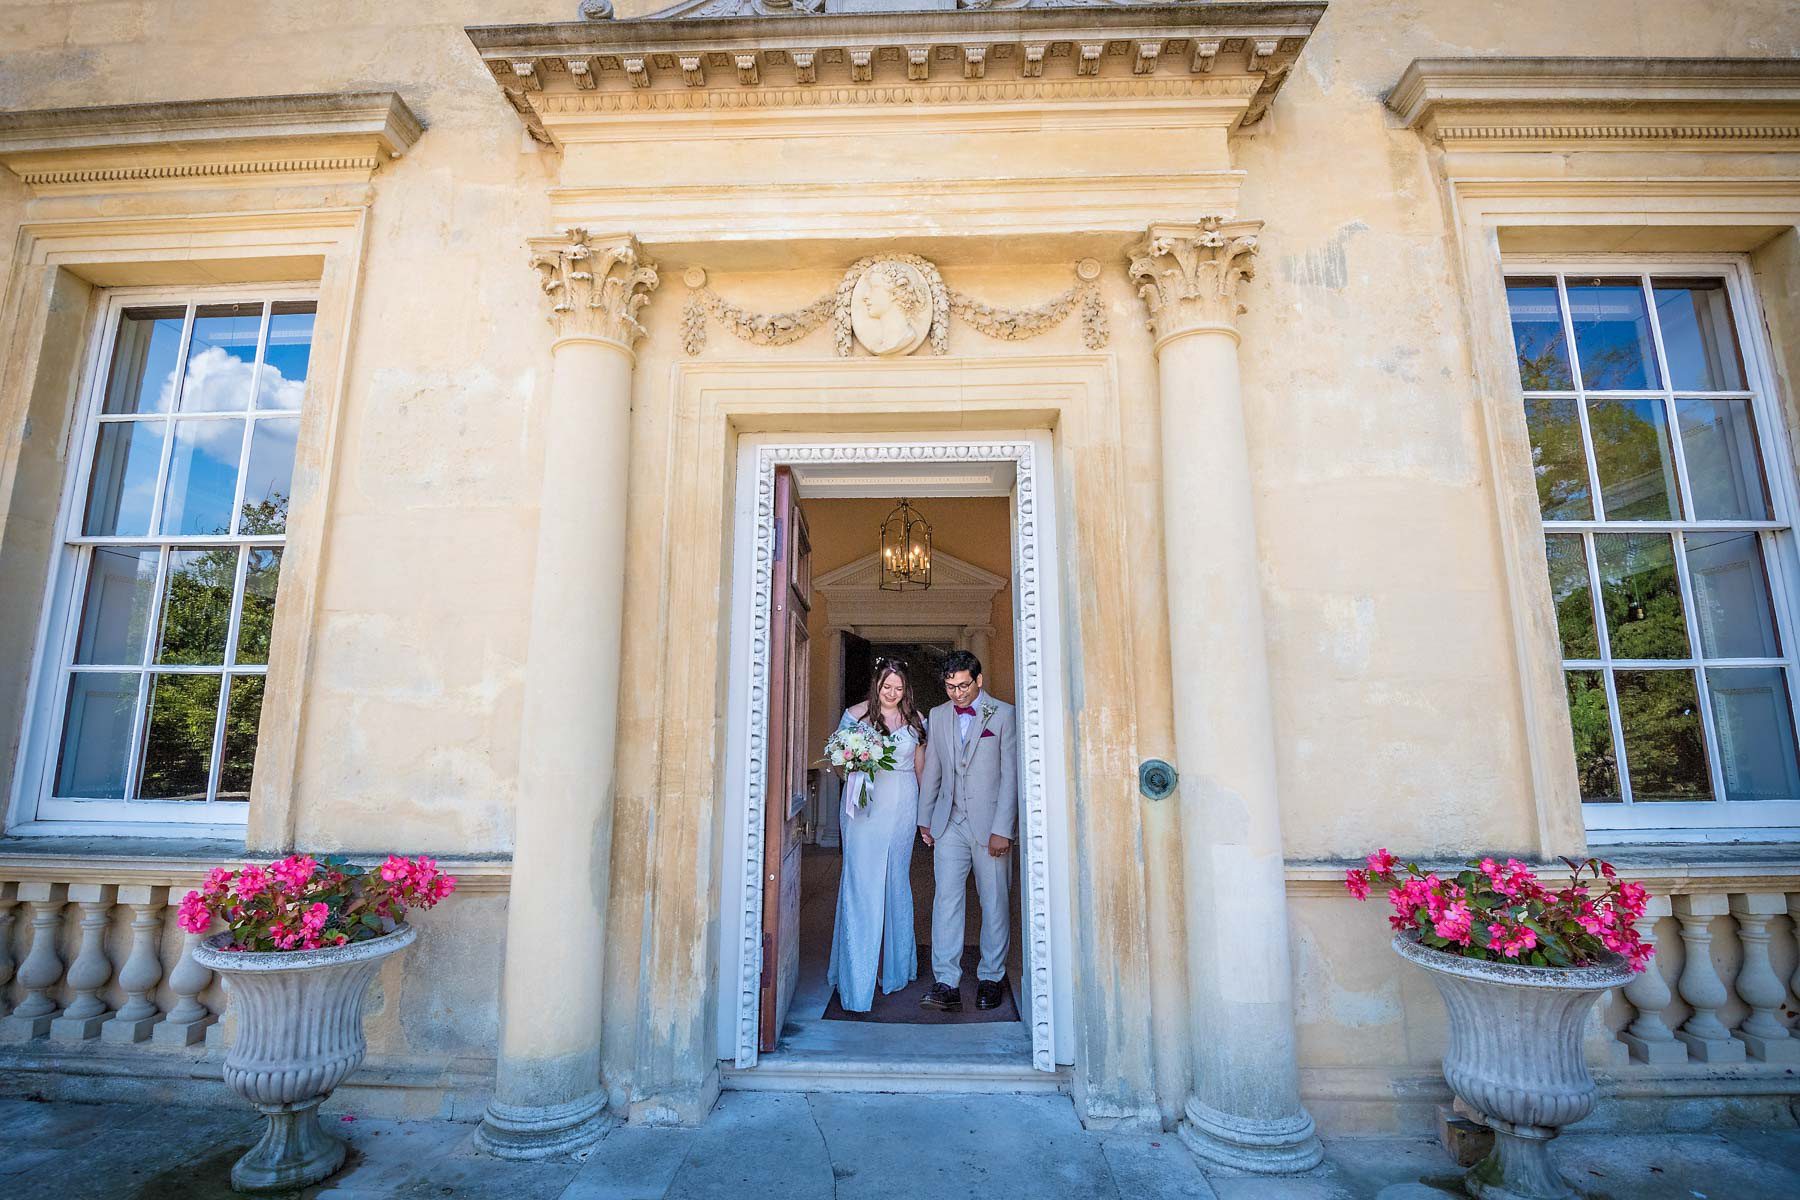 A wedded couple leave the entrance of Danson House after their ceremony